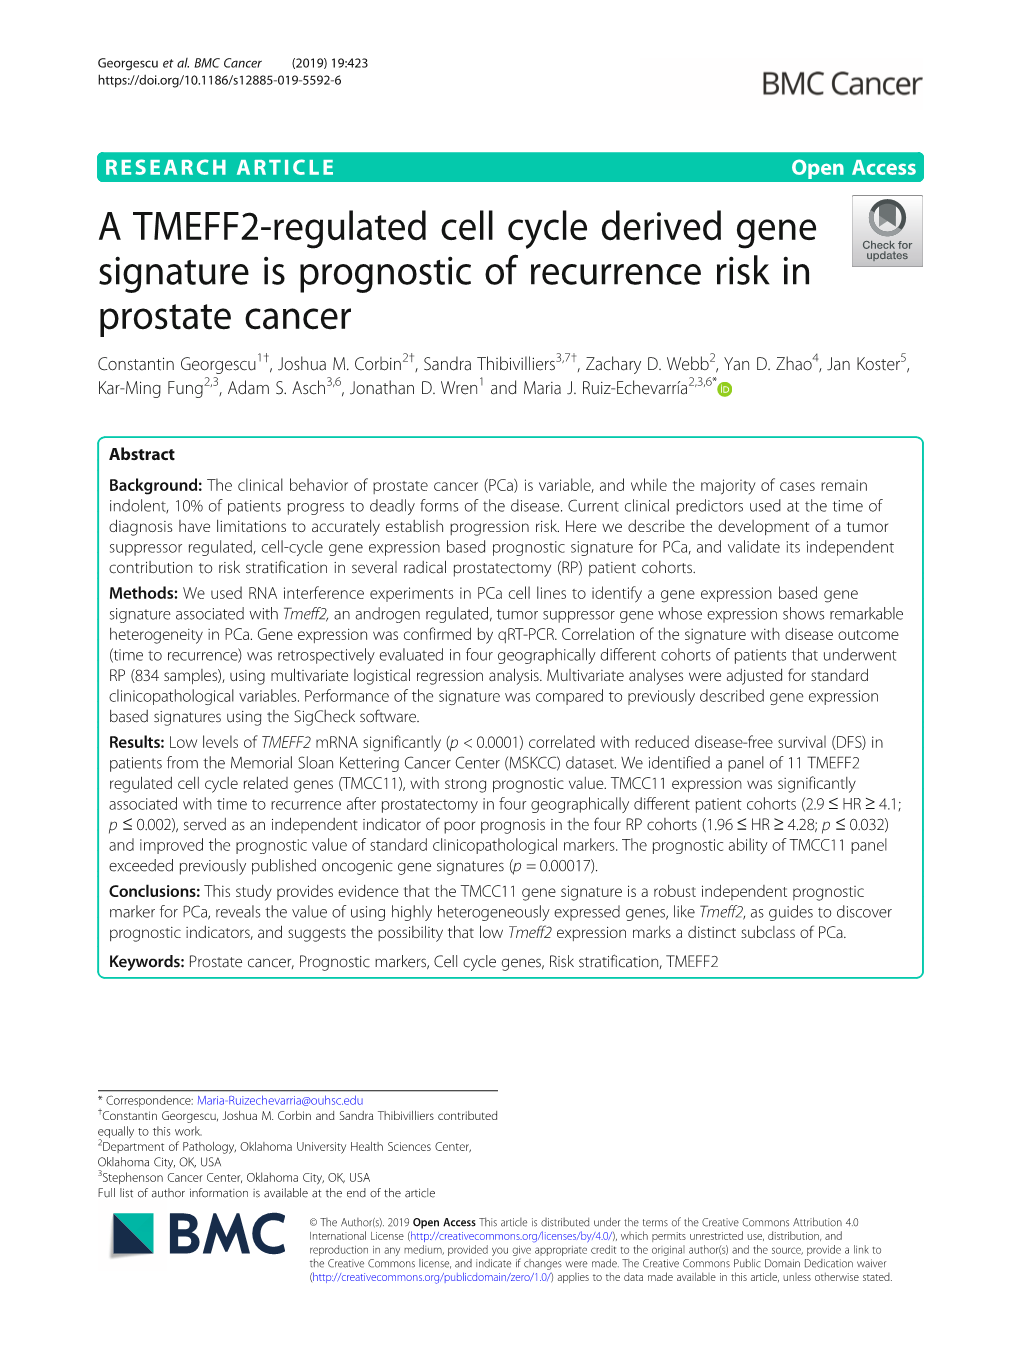 A TMEFF2-Regulated Cell Cycle Derived Gene Signature Is Prognostic of Recurrence Risk in Prostate Cancer Constantin Georgescu1†, Joshua M